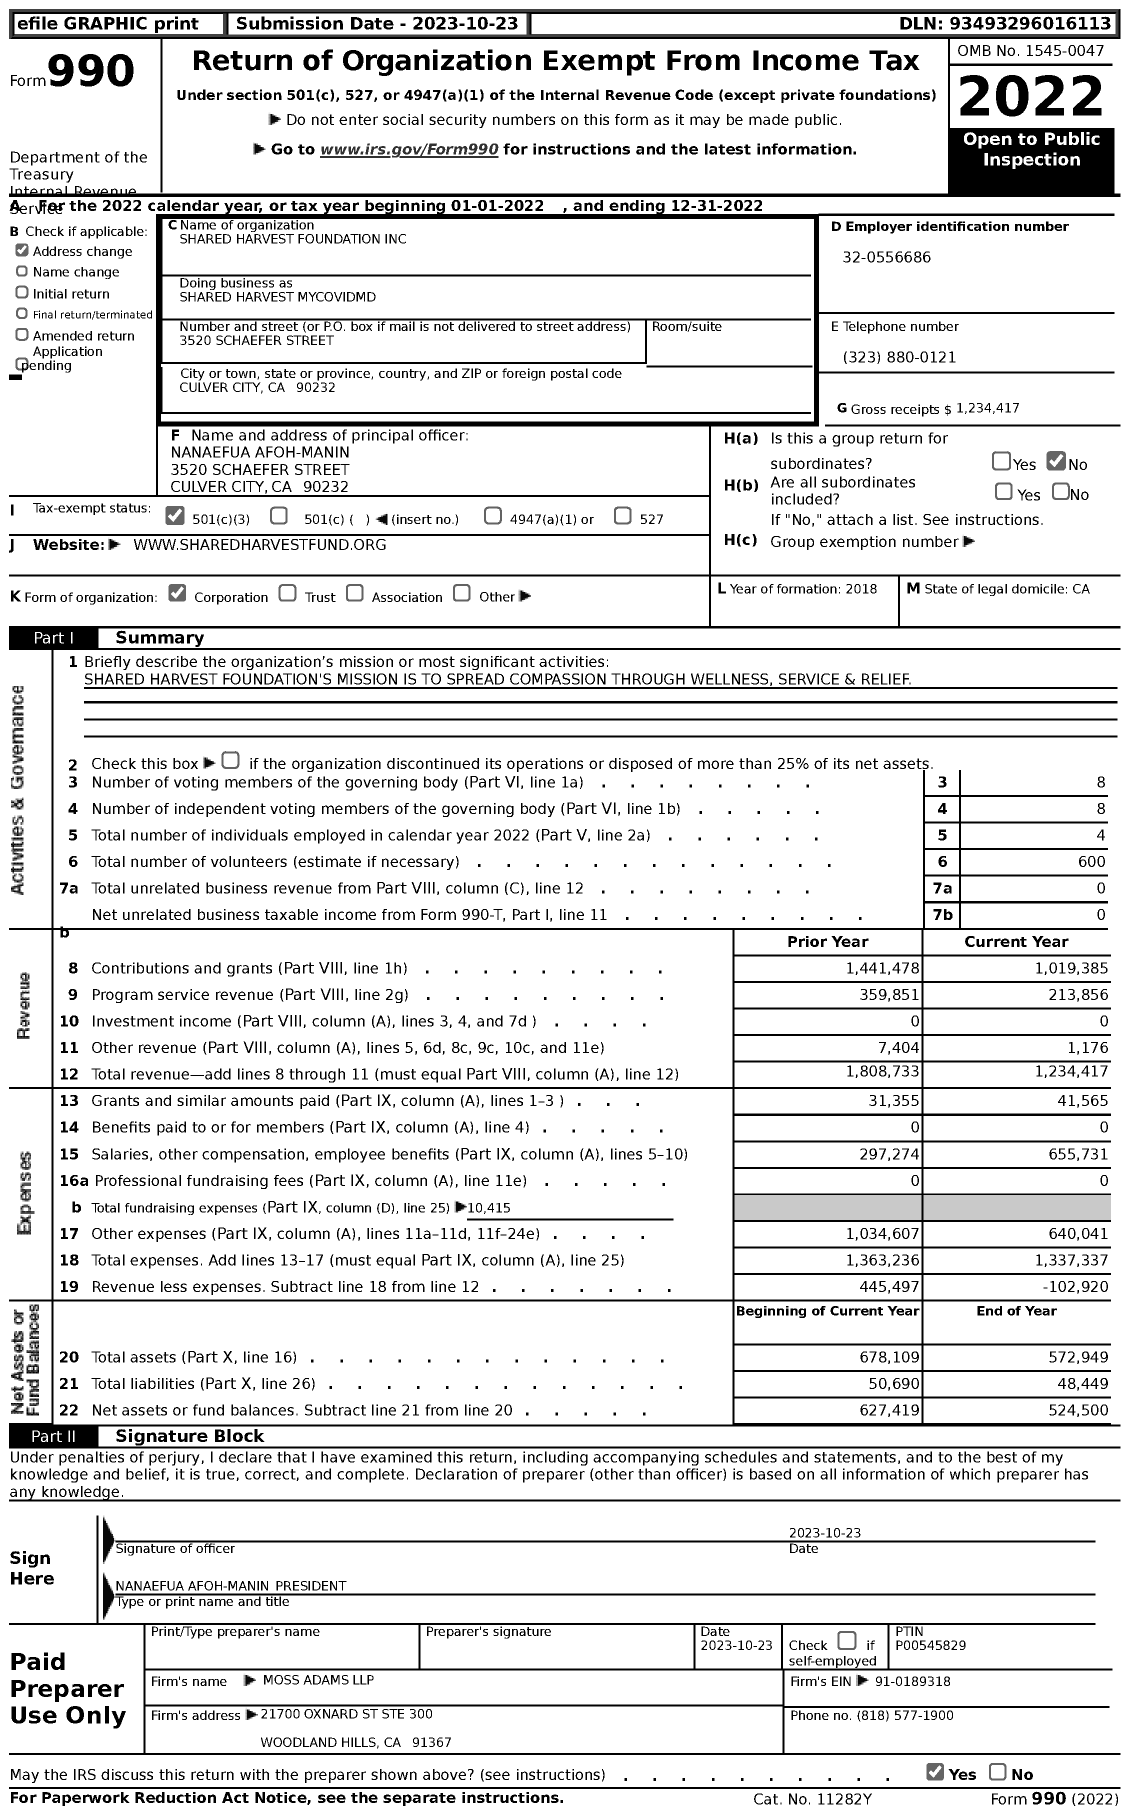 Image of first page of 2022 Form 990 for Shared Harvest Mycovidmd